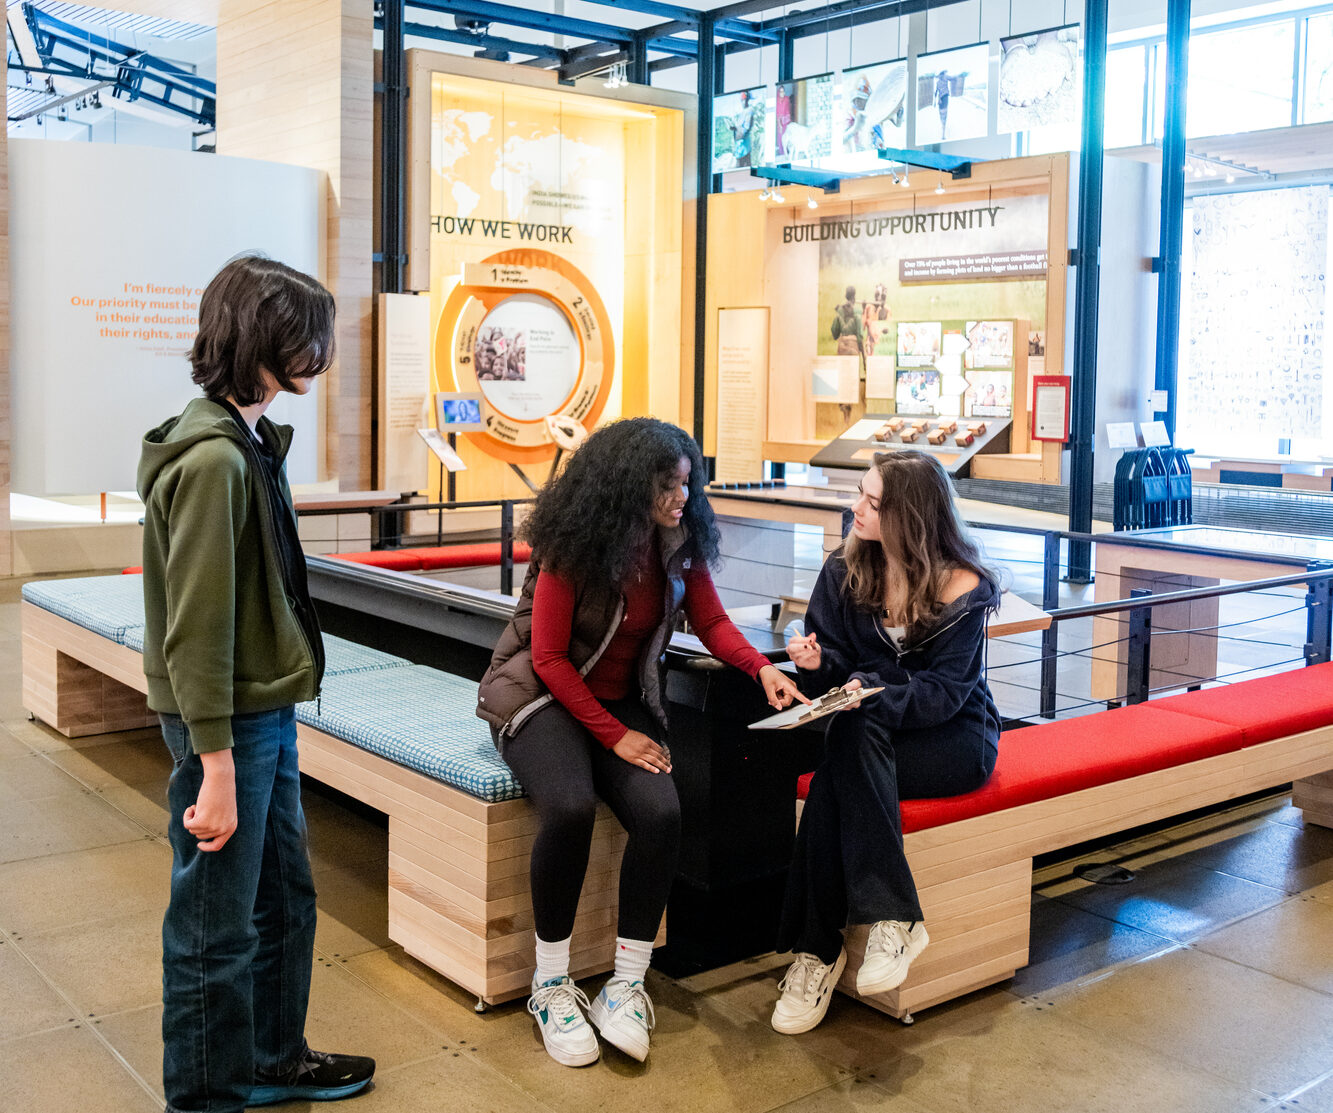 Teen visitors enjoy the "Our Work" gallery in the Discovery Center while interacting with a quiz.